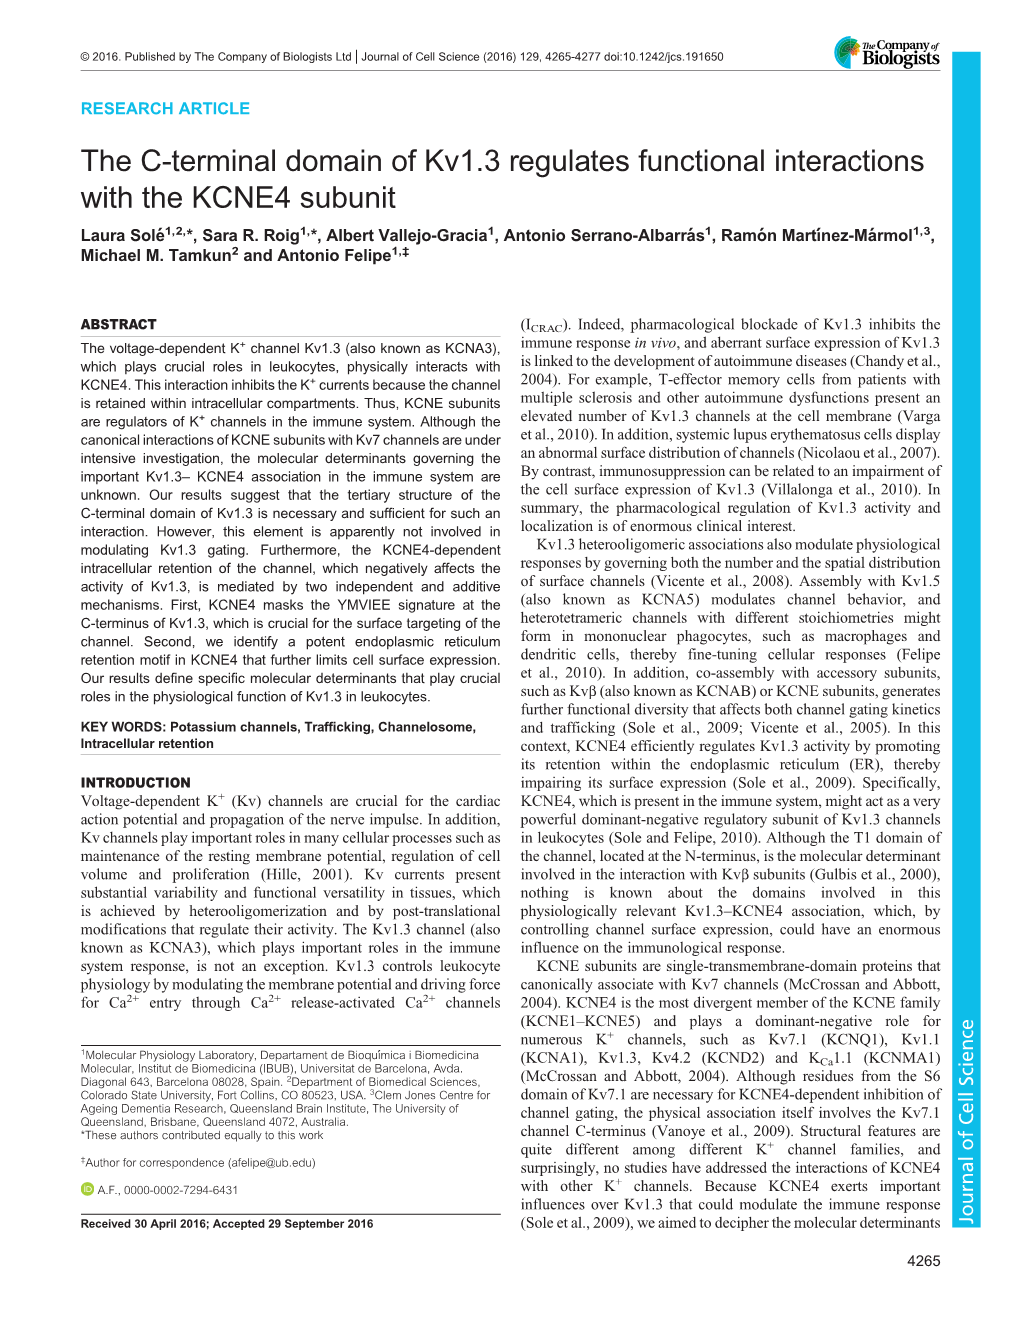 The C-Terminal Domain of Kv1.3 Regulates Functional Interactions with the KCNE4 Subunit Laura Solé1,2,*, Sara R